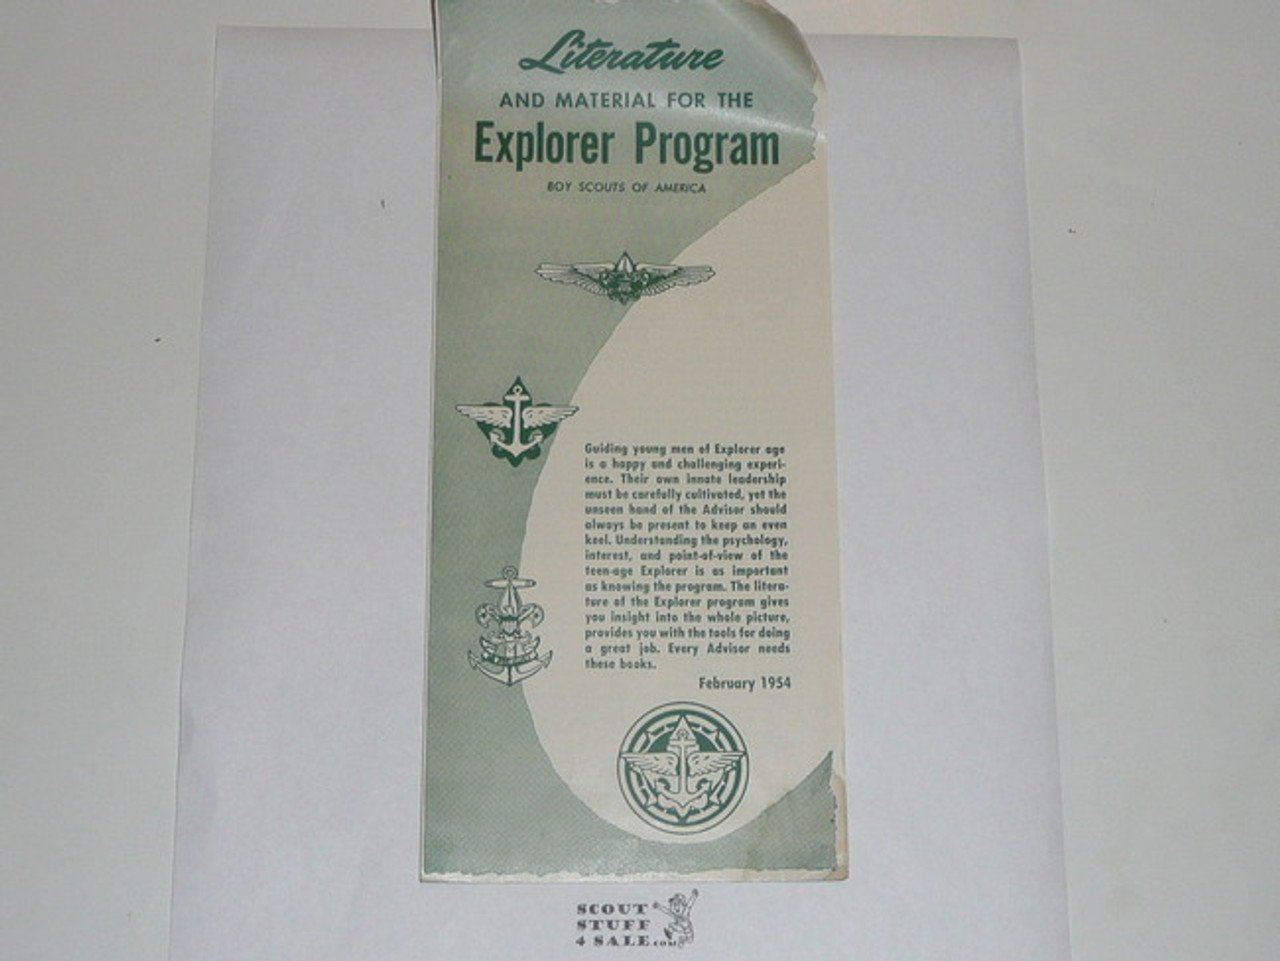 1954 Literature and Material for the Explorer Program, 2-54 Printing